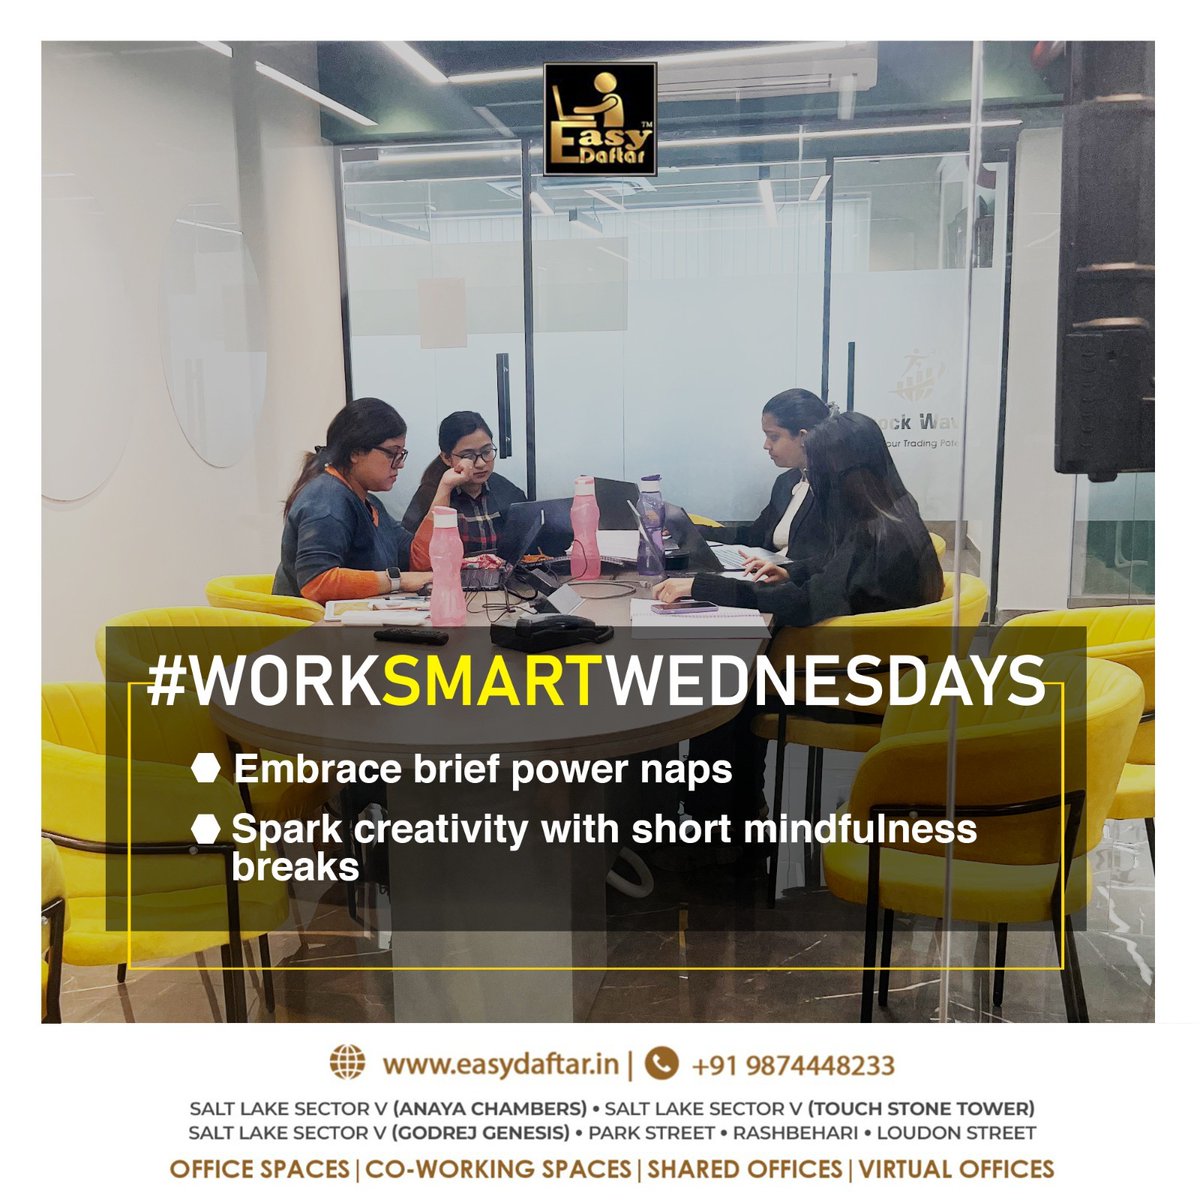 Optimize your midweek productivity with EasyDaftar. Strategically integrate short power naps and ignite creativity through mindful breaks. Elevate your workday experience.

#EasyDaftar #EDWorkspace #EasyDaftarOffice #DaftarYourDay #OfficeEssentials #WorkplaceStyle